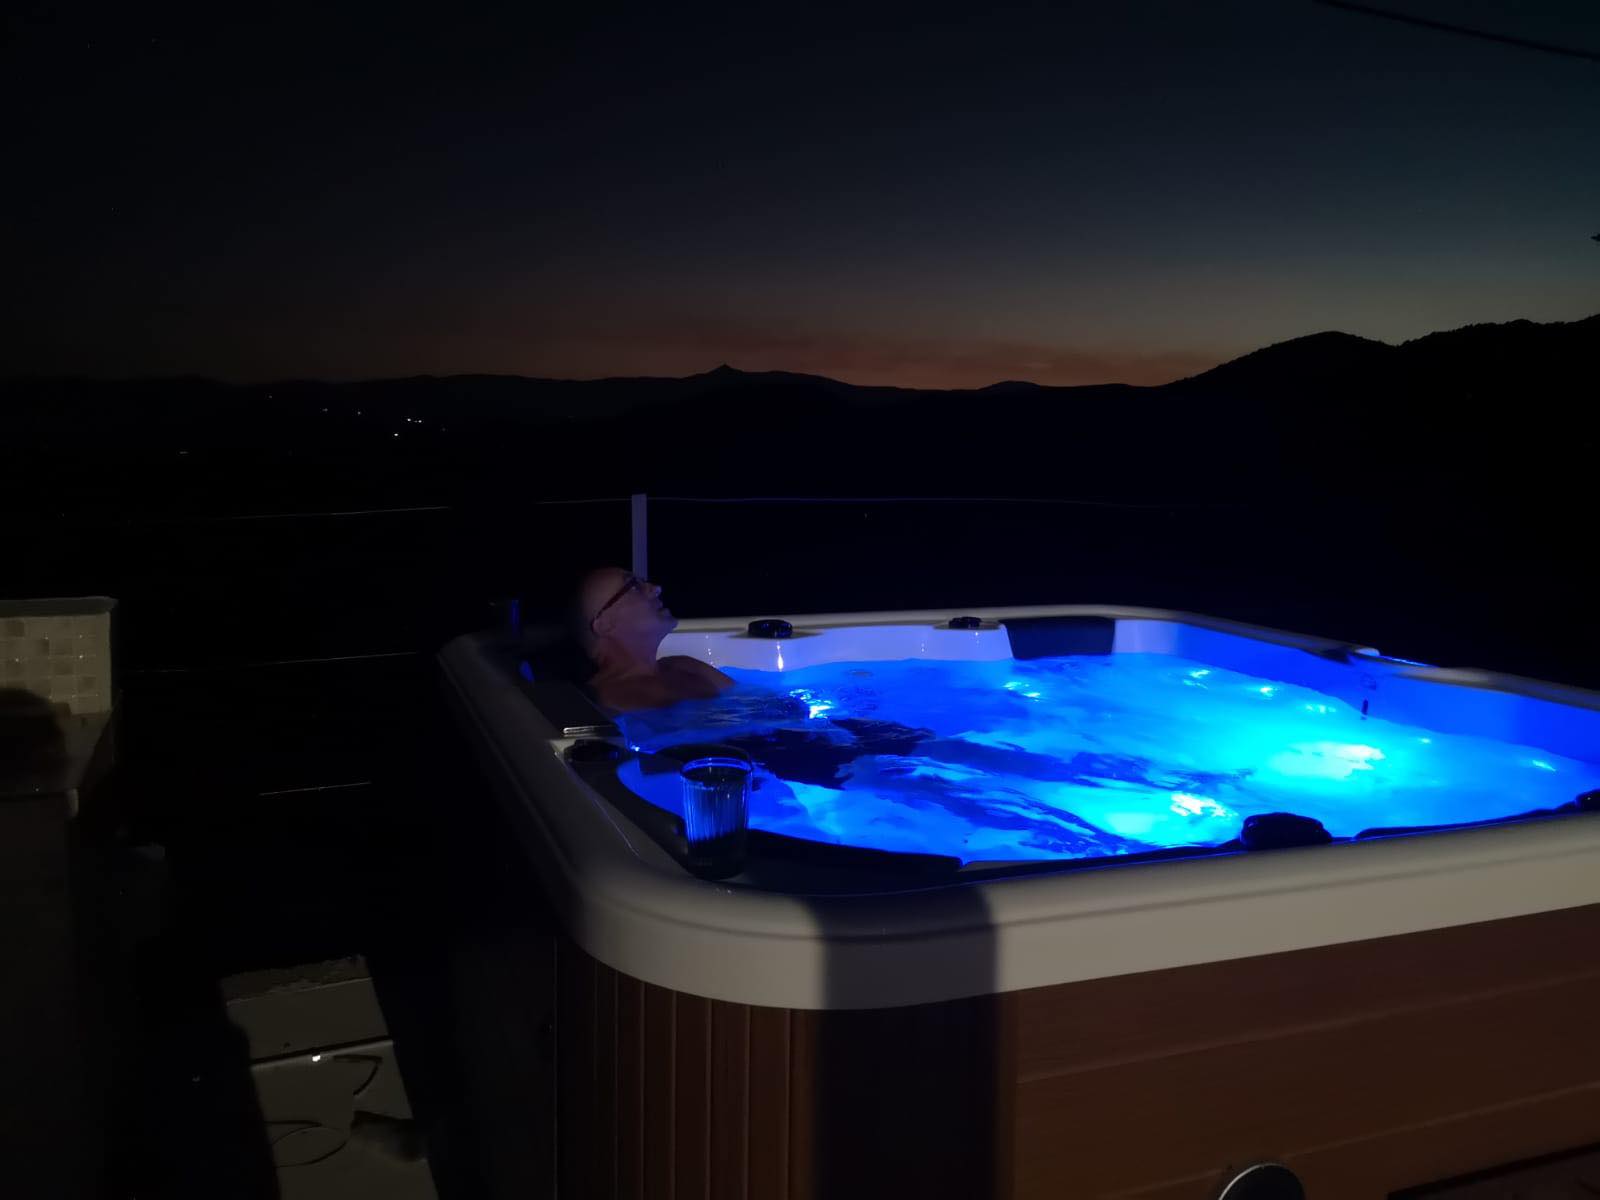  Sunset Spa Experience - jacuzzi